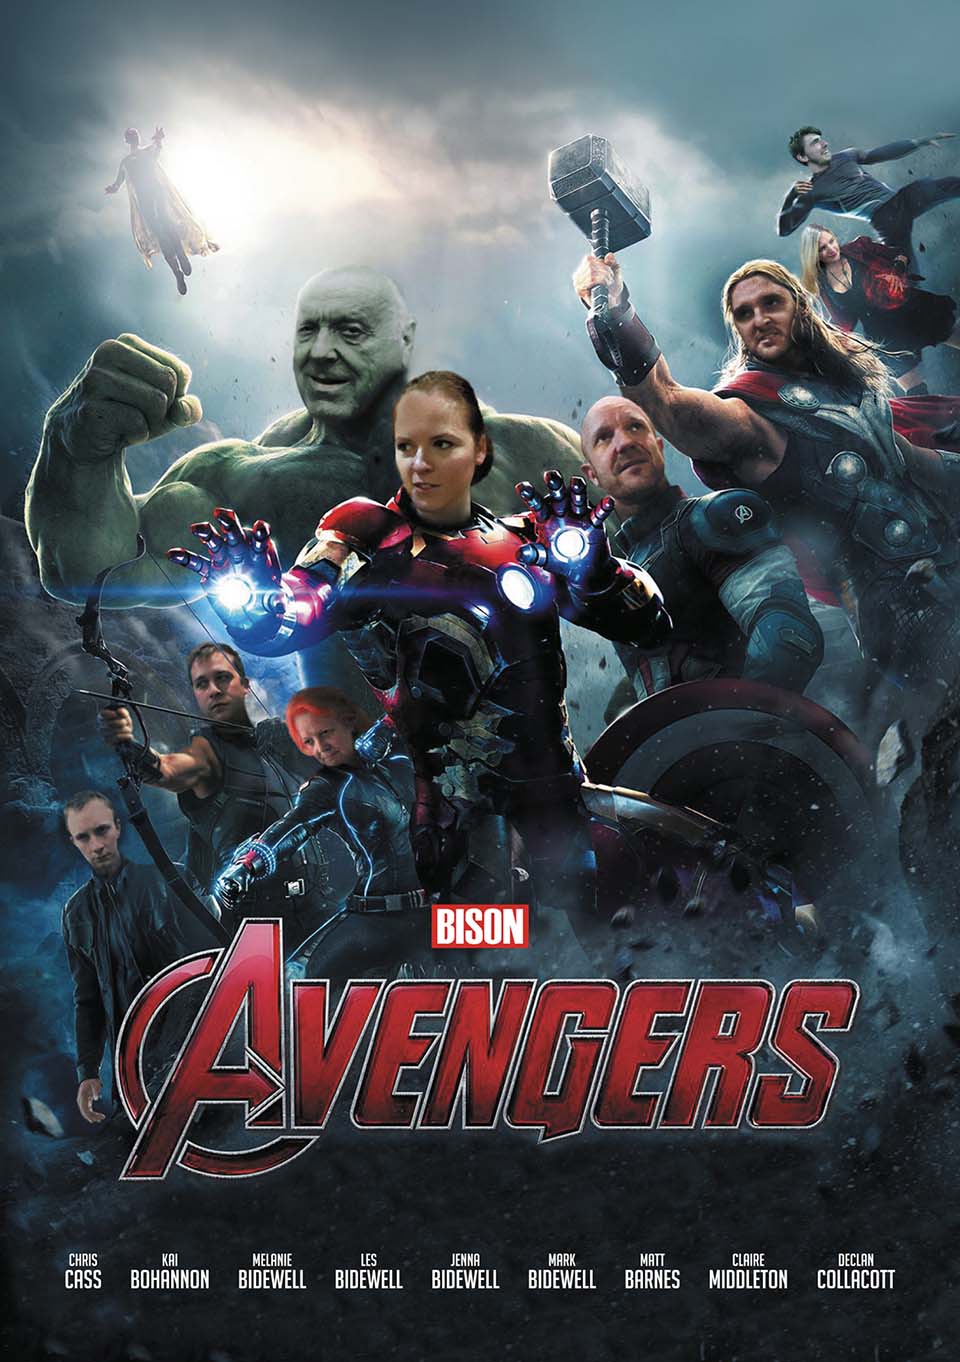 Bison Avengers graphic